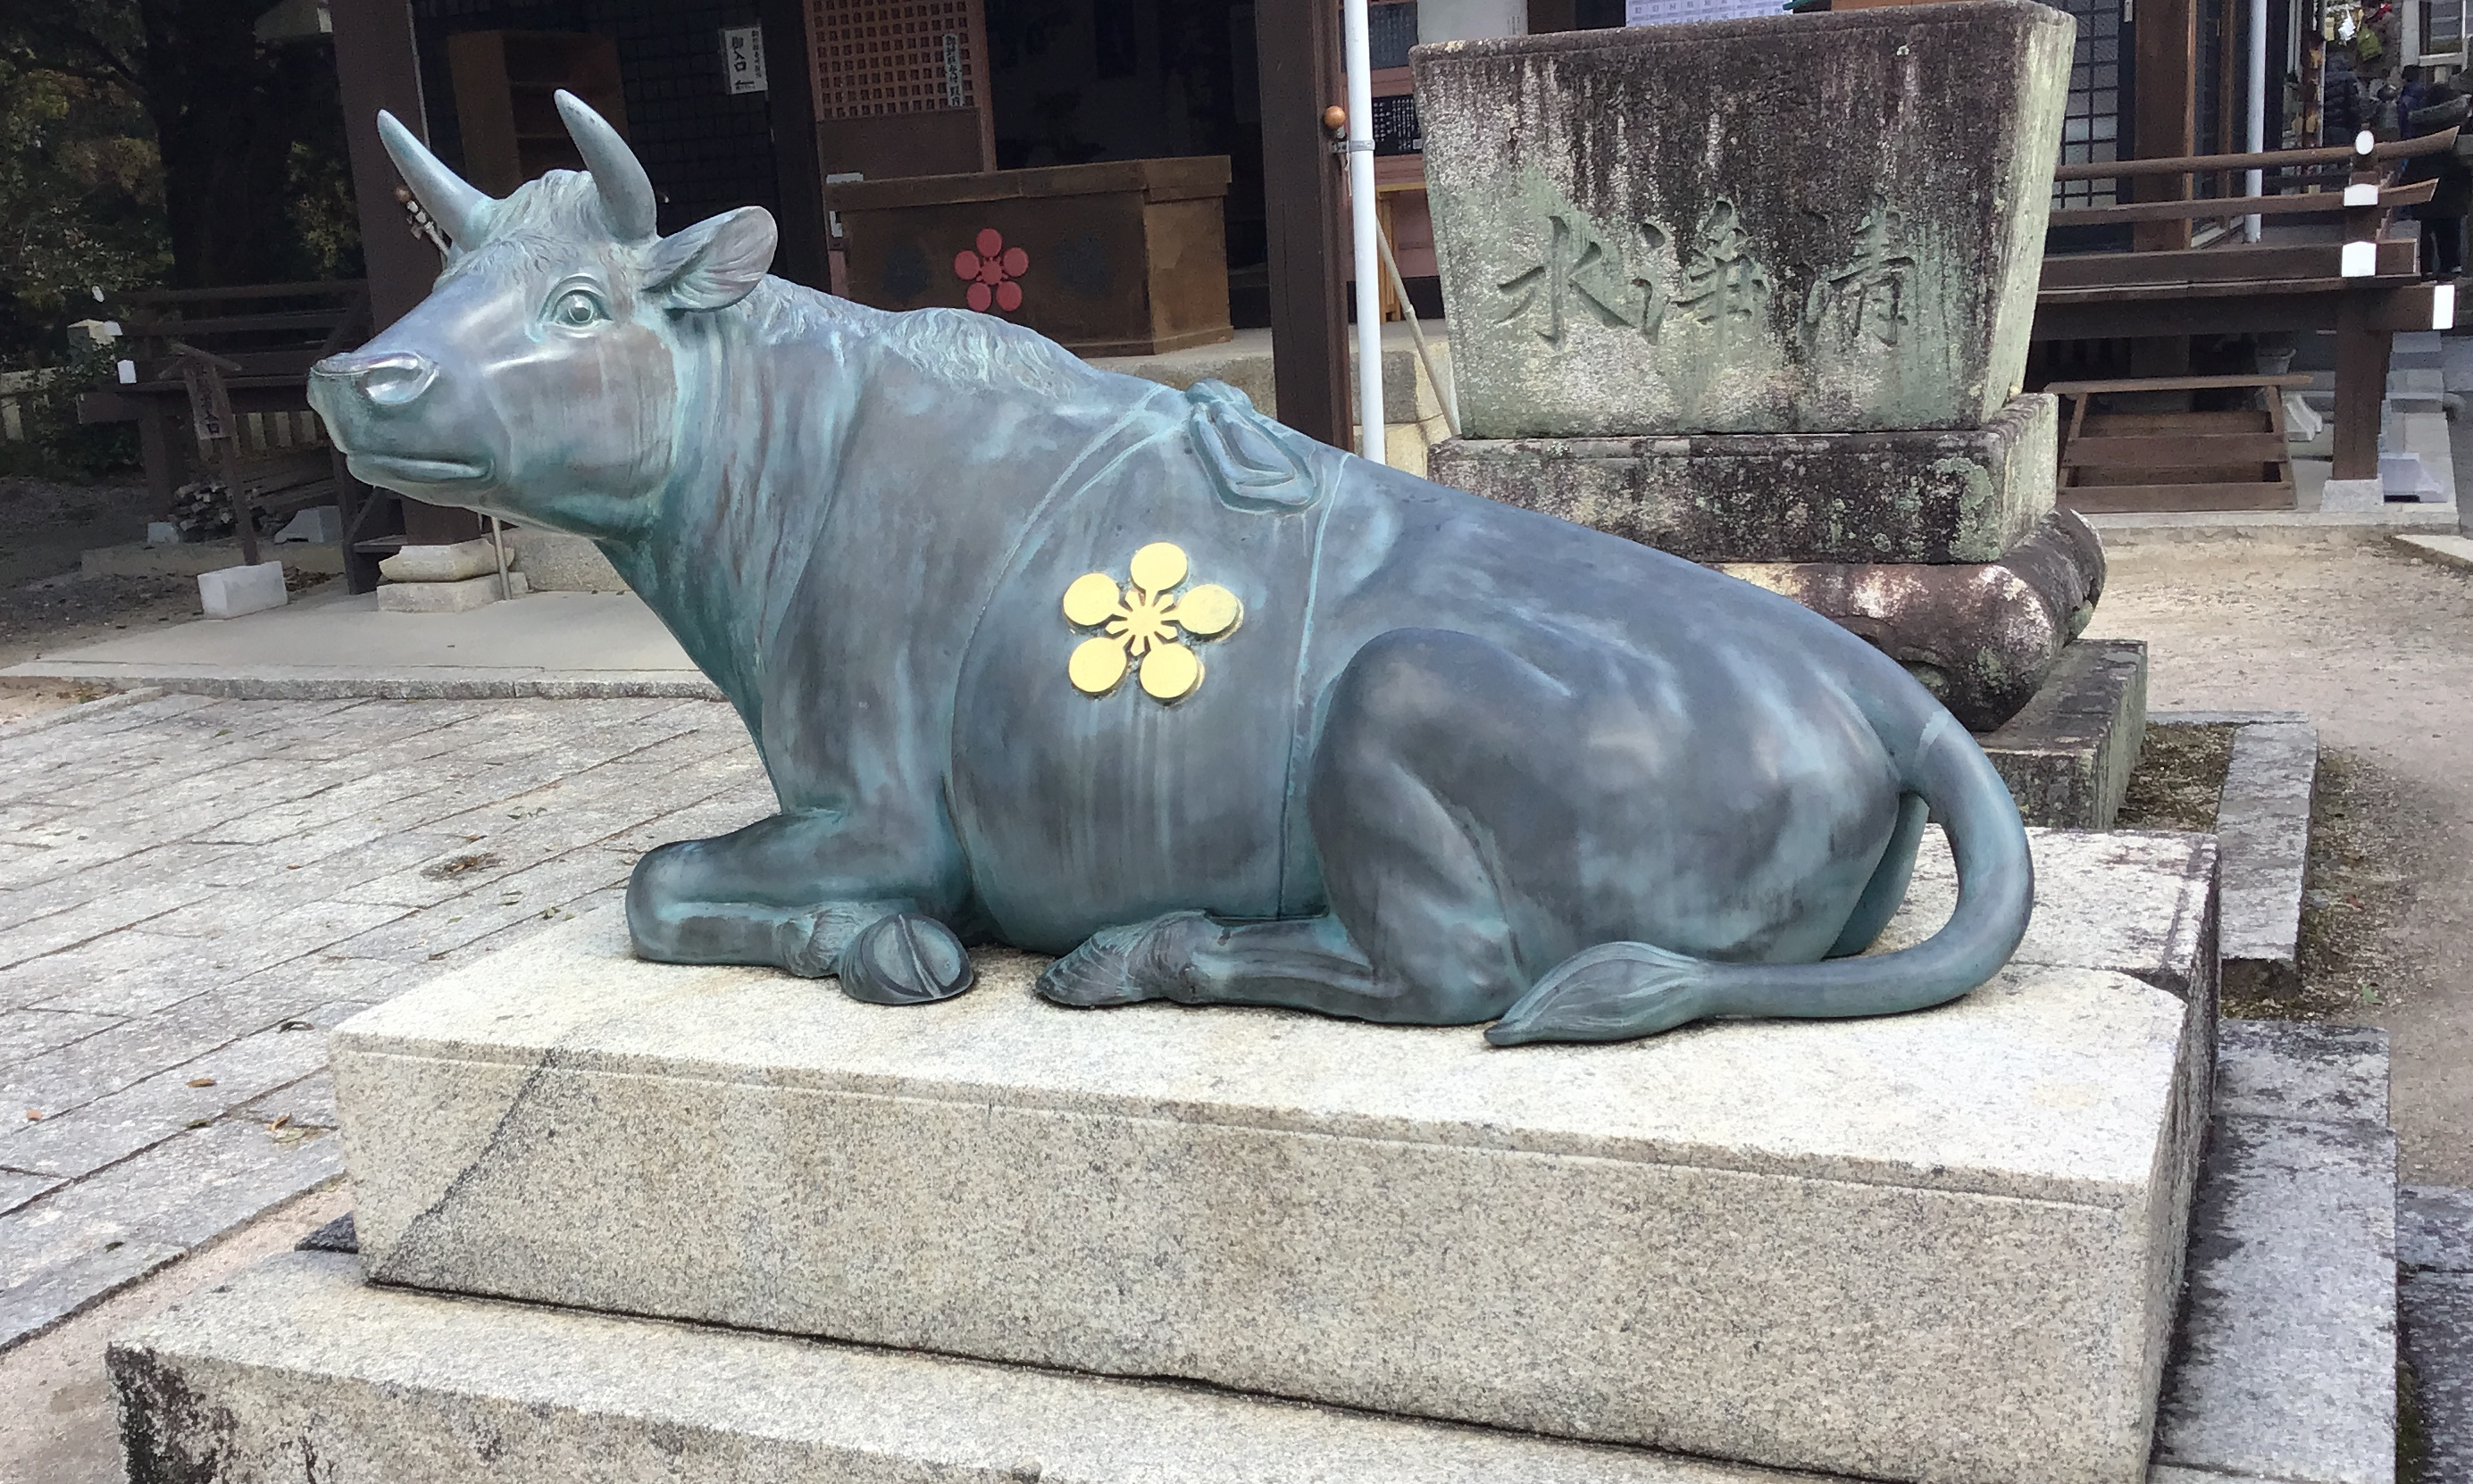 A statue of a cow